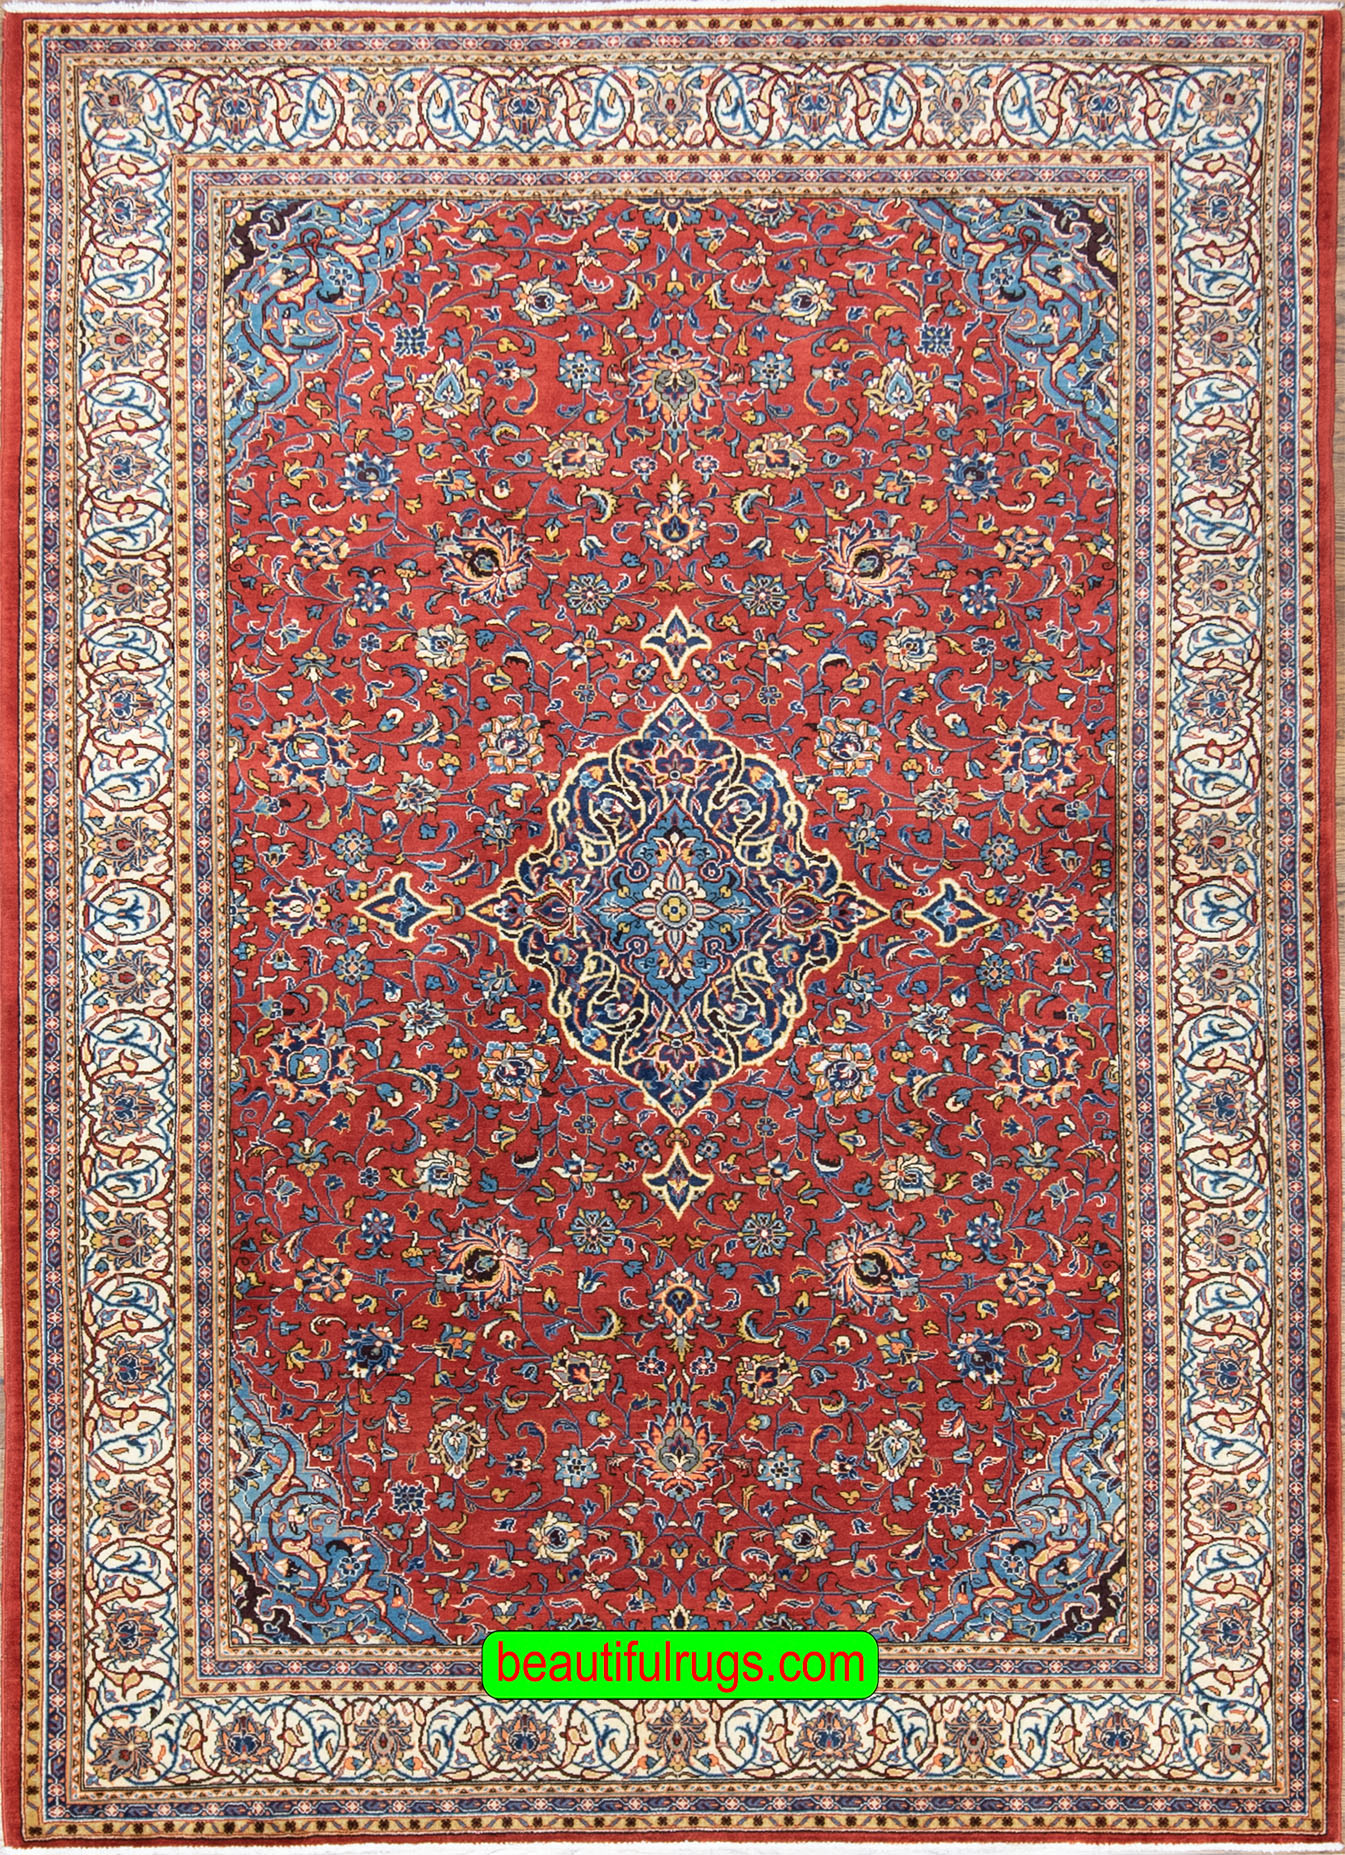 Handmade Persian Kashan dining room area rugs, floral design with rustic red and beige colors. Size 6.8x10.